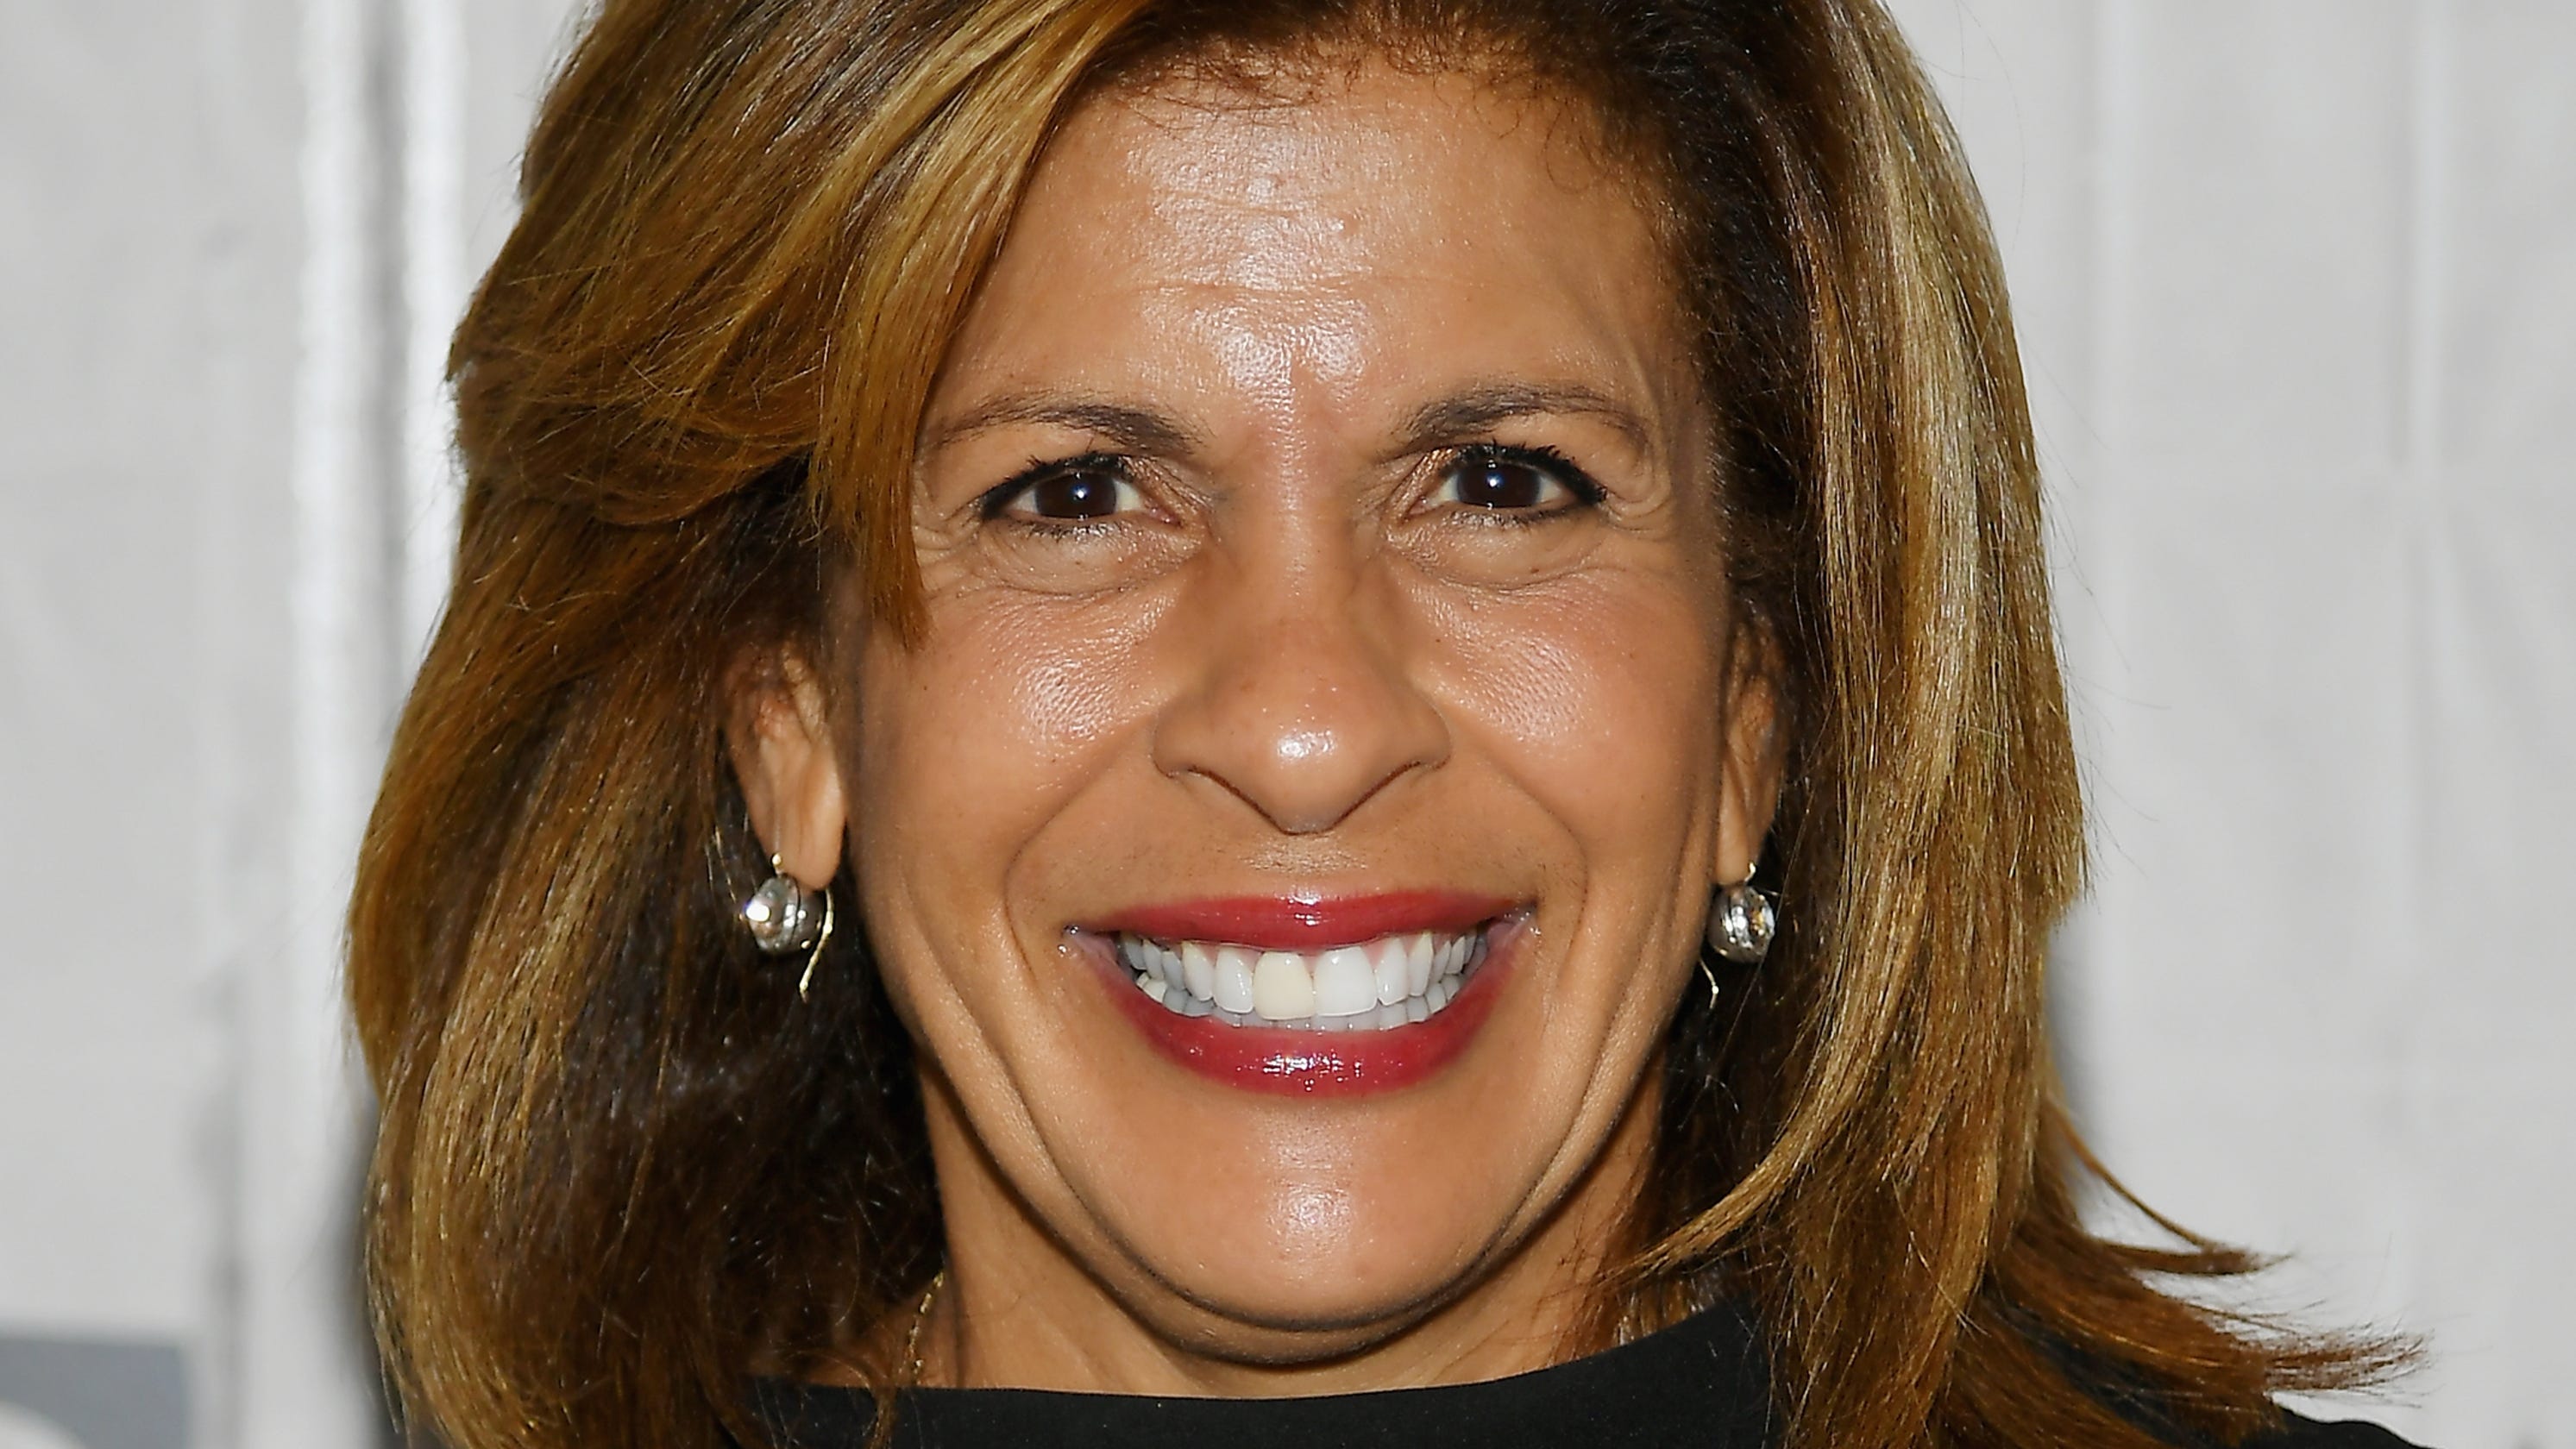 The "Today" anchor revealed Tuesday she has adopted a baby girl. hoda...